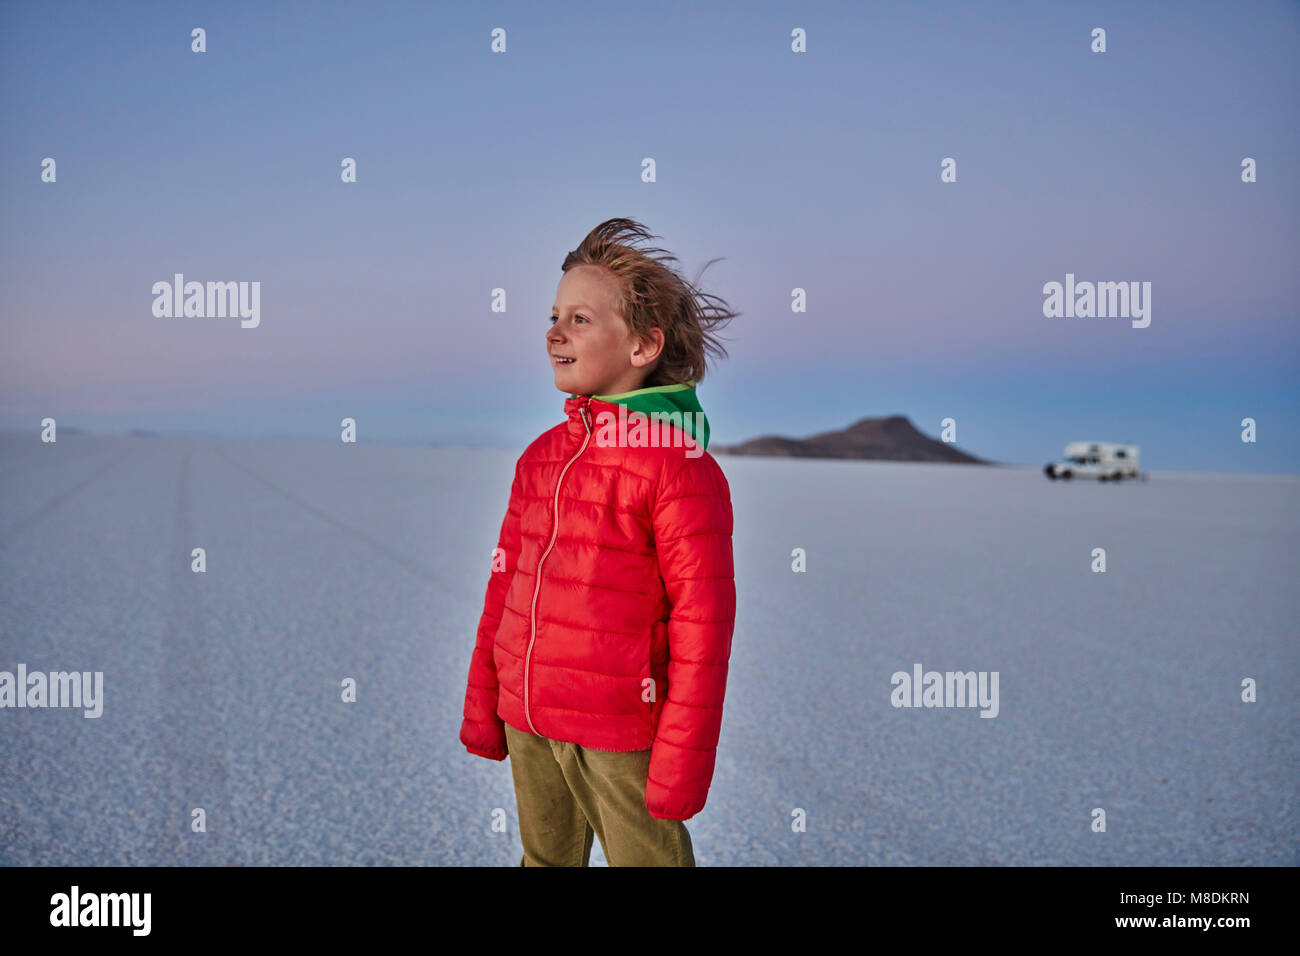 Young boy standing on salt flats, looking at view, recreational vehicle in background, Salar de Uyuni, Bolivia, South America Stock Photo